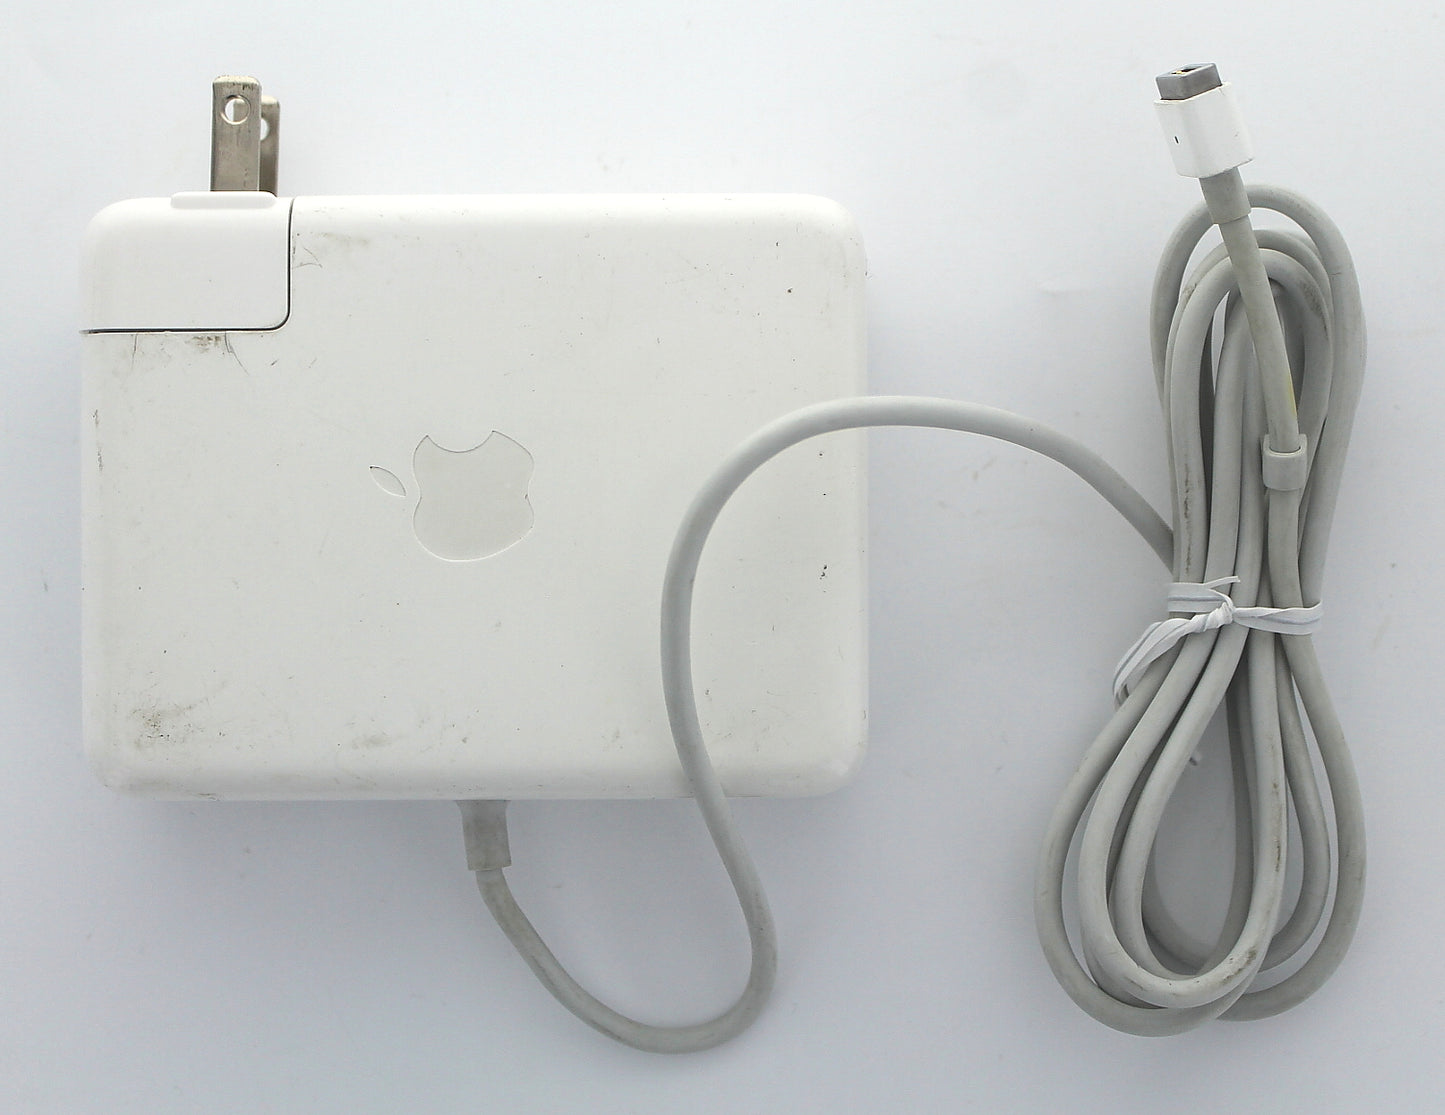 Apple 85W MagSafe Power Adapter Wall Charger for MacBook (A1172 Old Model)